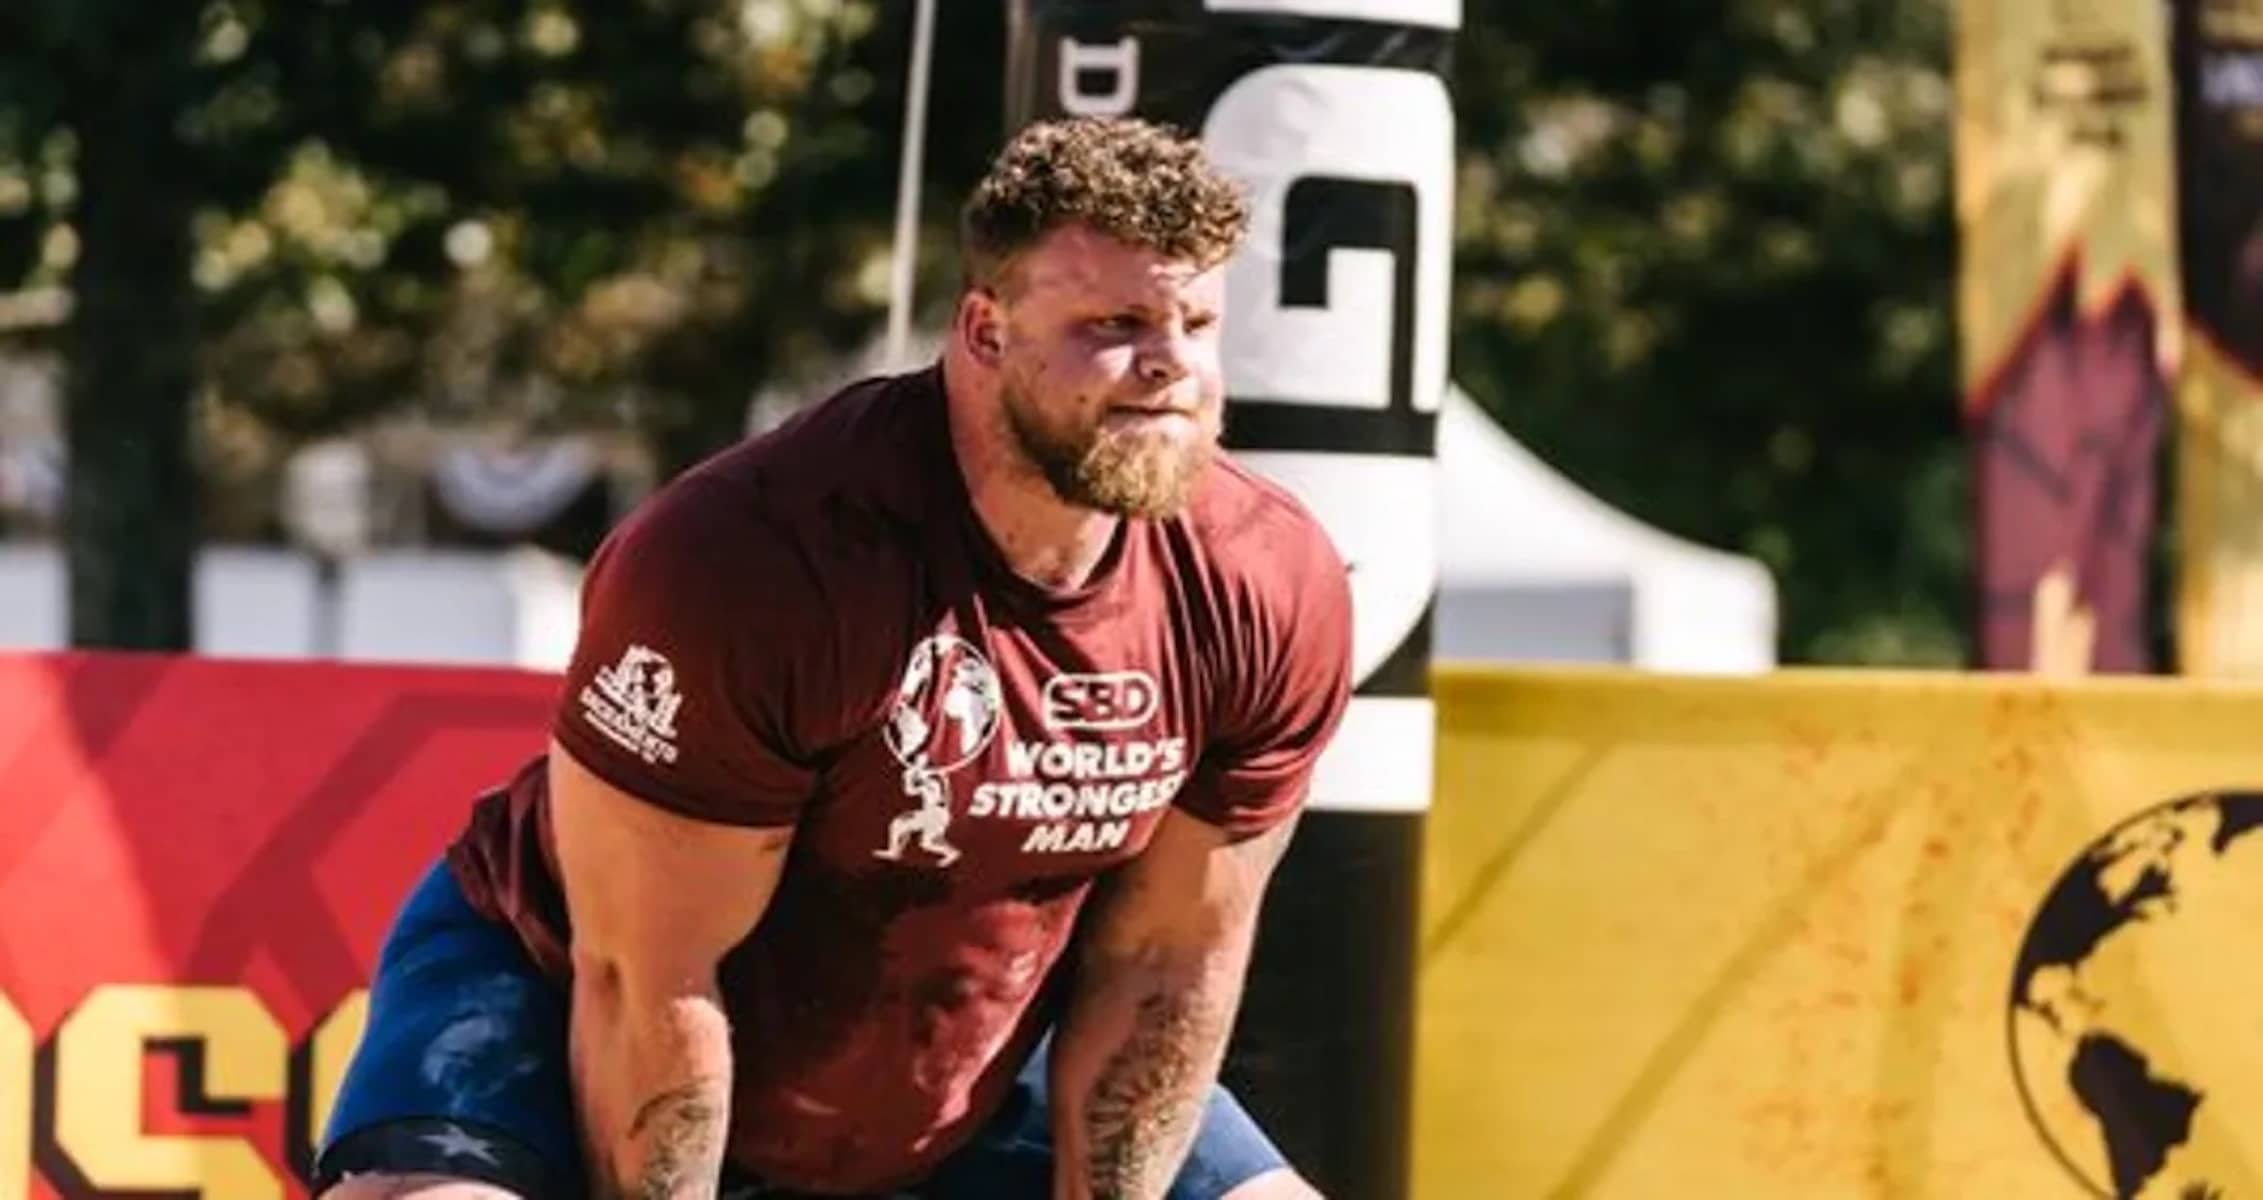 Former Central lineman to World's Strongest Man event - Central